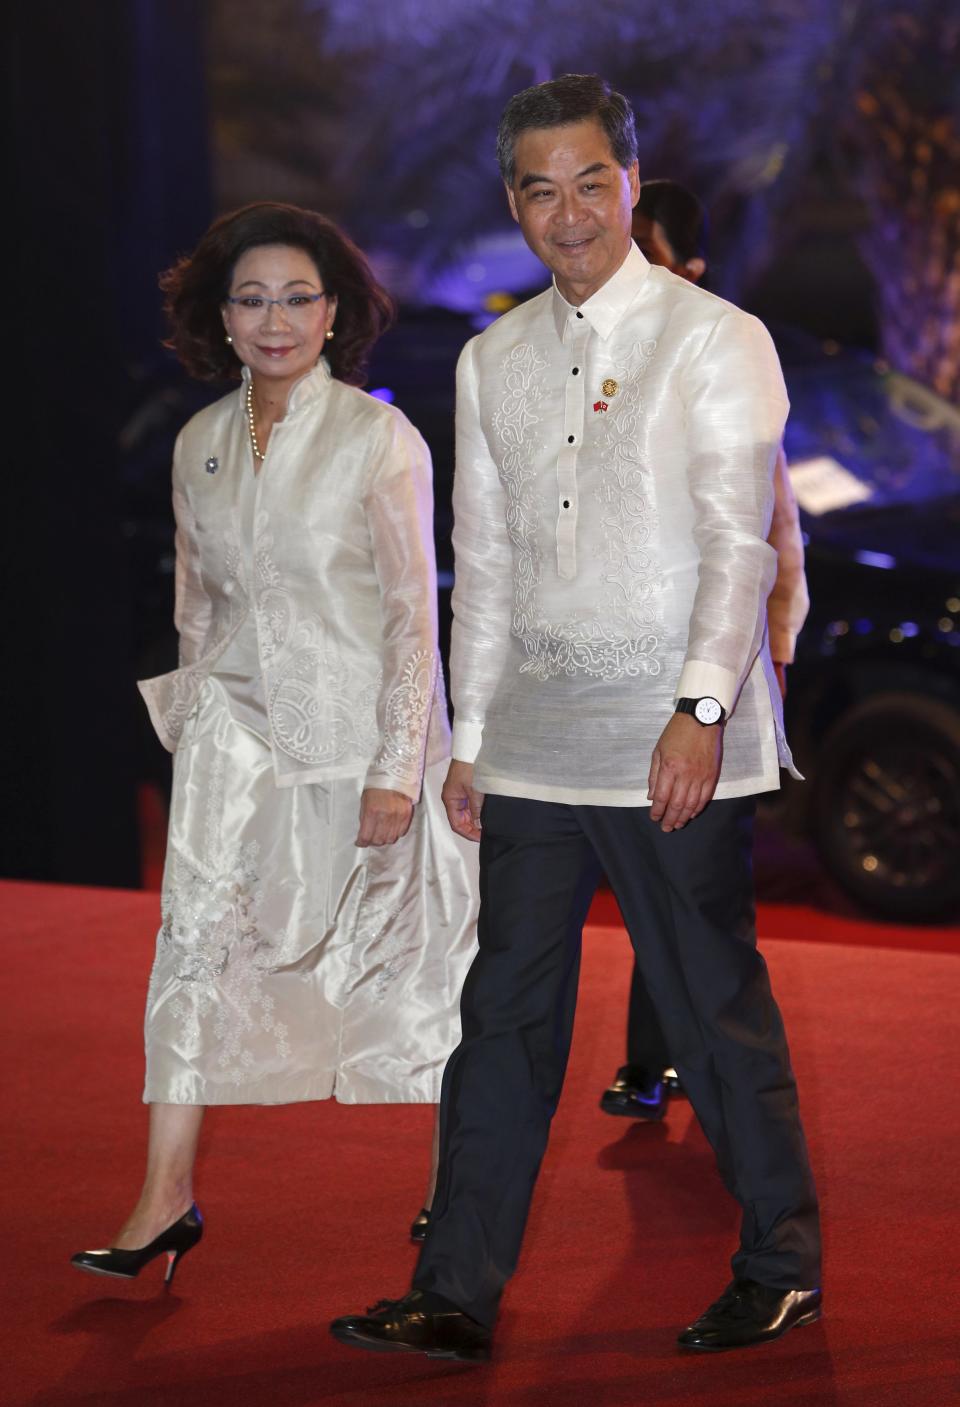 Chief Executive of Hong Kong Leung Chun-ying and his wife Regina Tong Ching-yi for a welcome dinner during the Asia-Pacific Economic Cooperation (APEC) summit in the capital city of Manila, Philippines